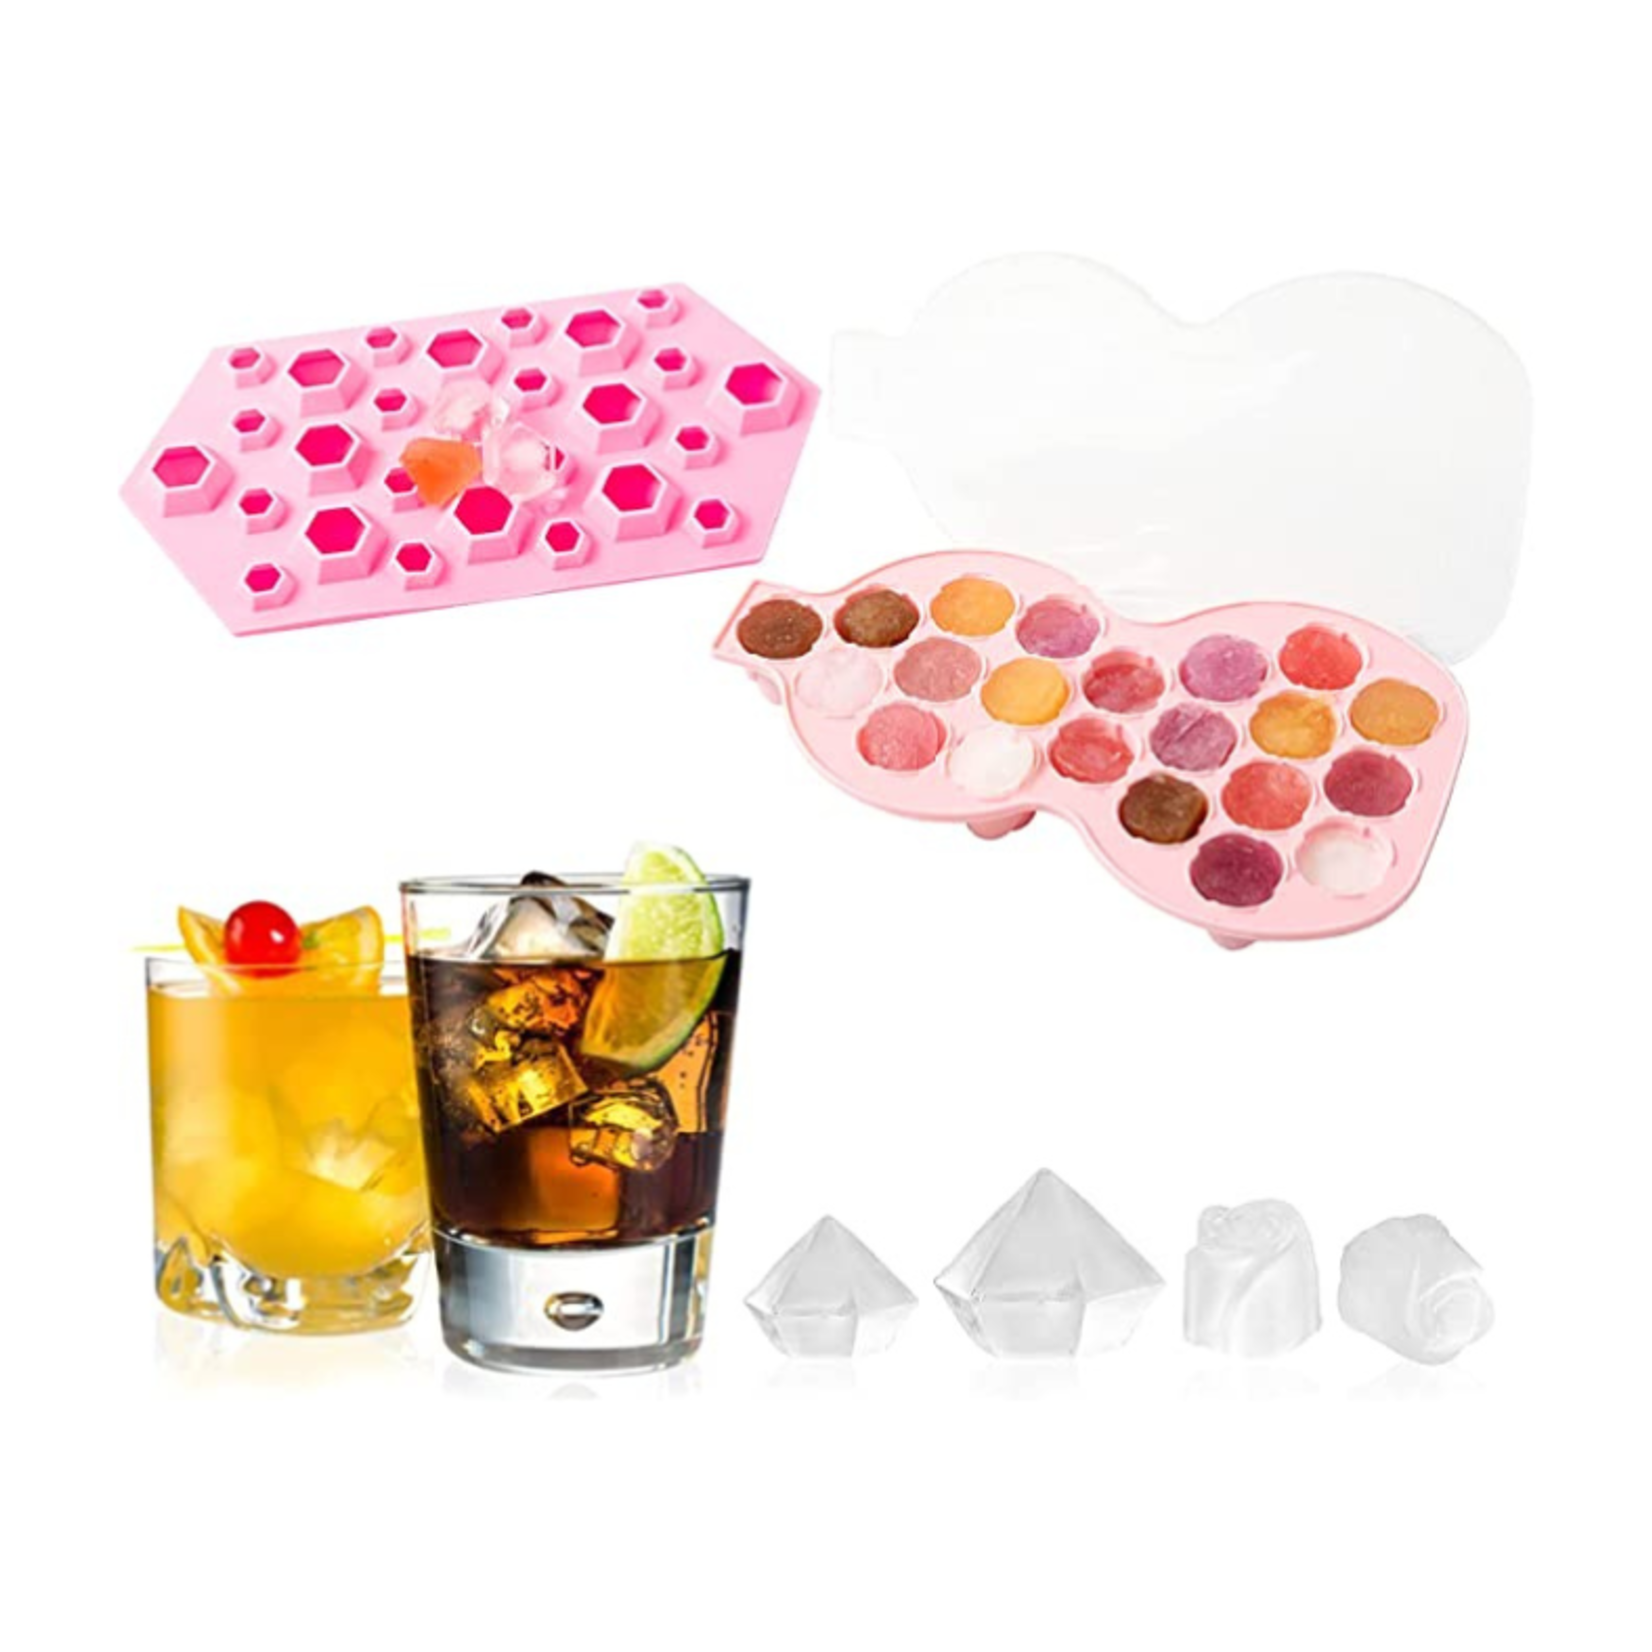 Cinseer Silicone & Flexible Ice Cube Molds